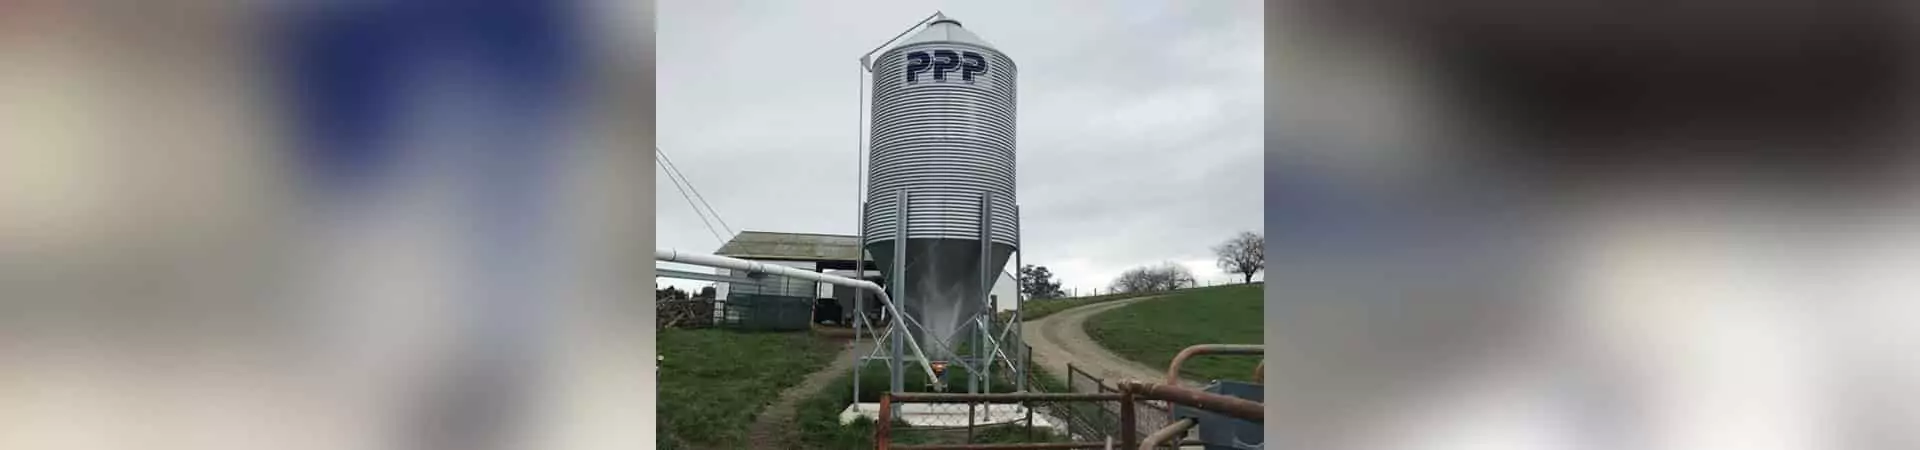 PPP Silo